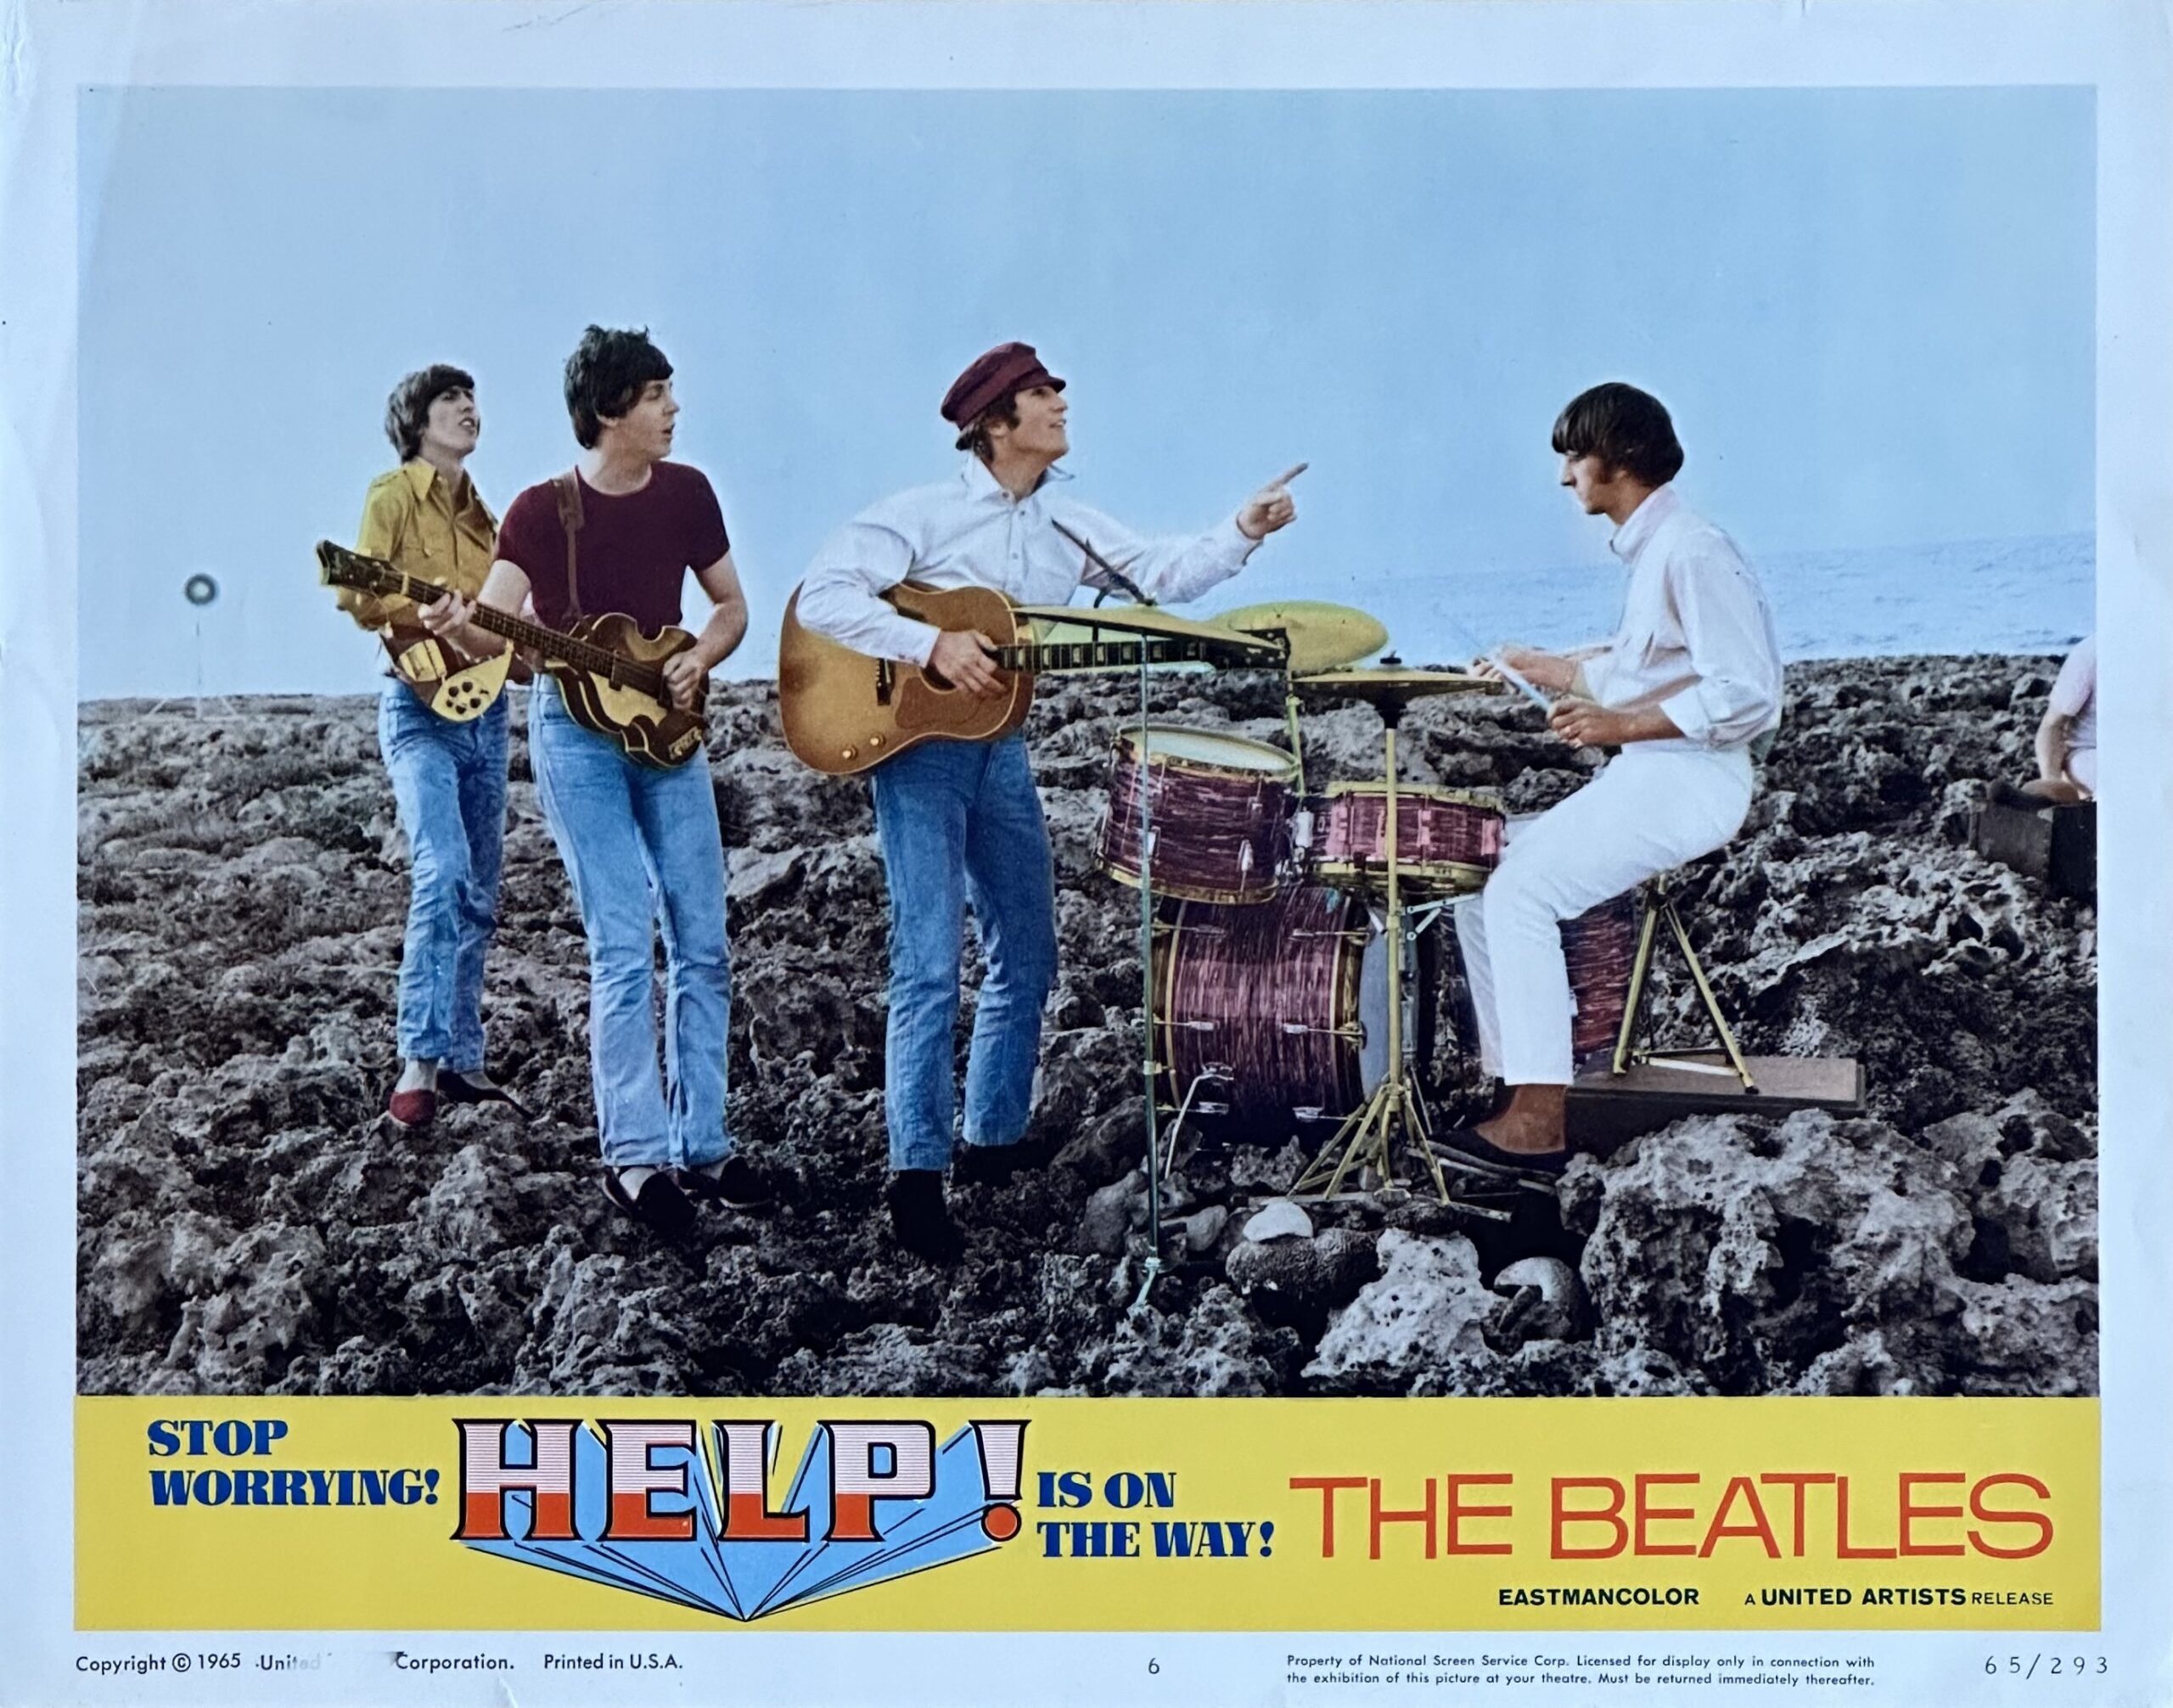 Original vinrage cinema lobby card movie poster for the Beatles in Help!